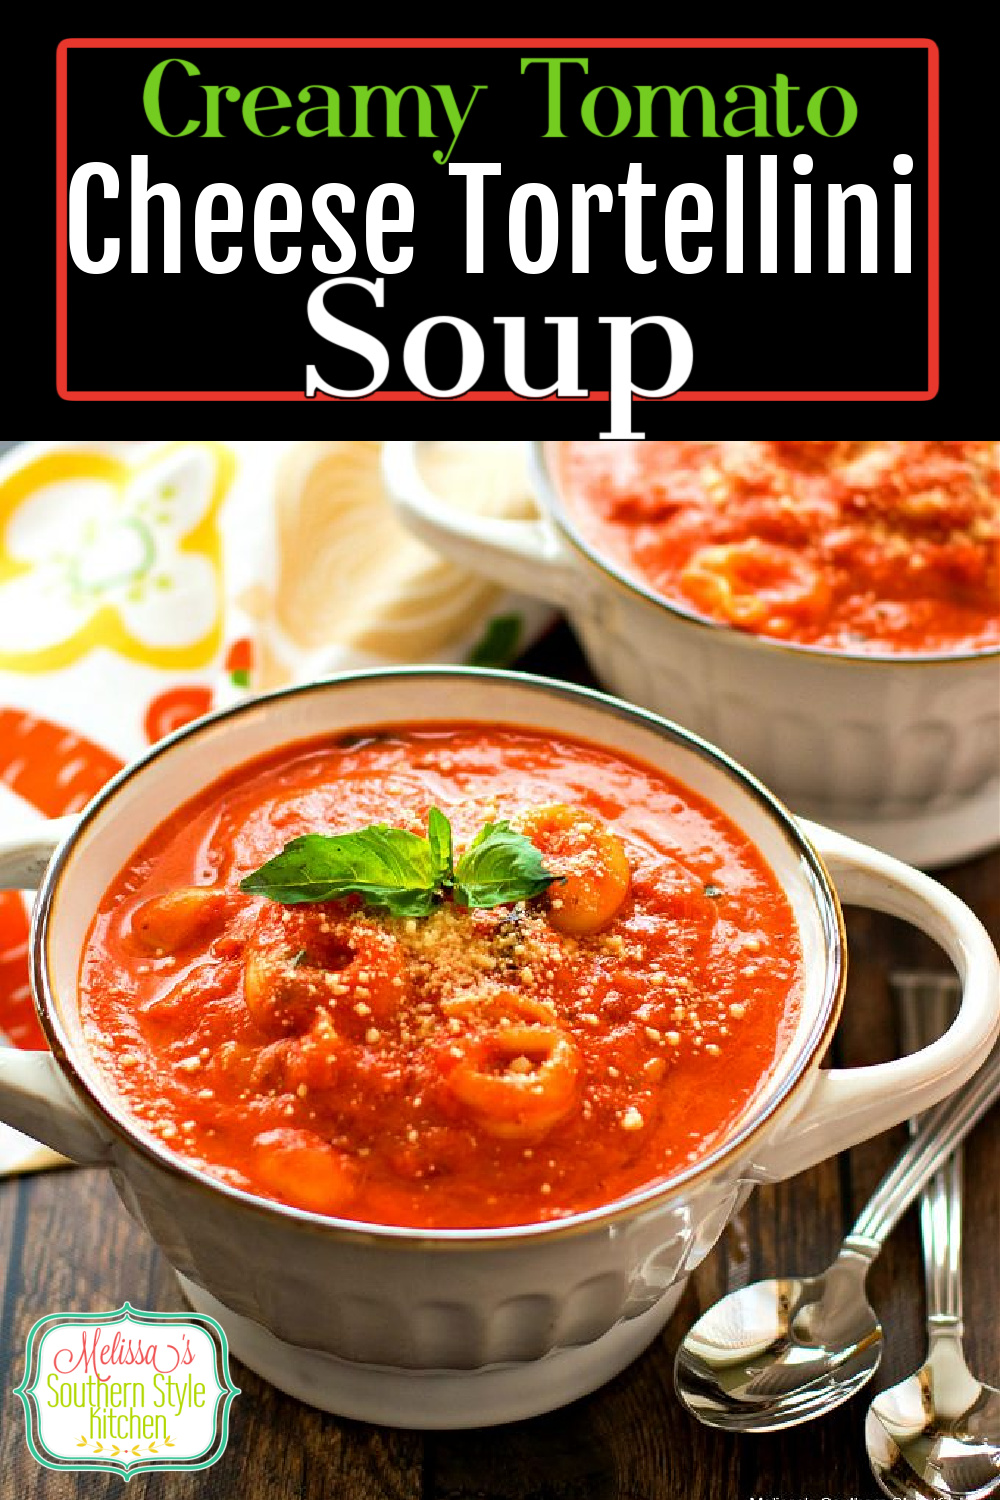 Looking for weekday meal inspiration? You can make this hearty Creamy Tomato Cheese Tortellini Soup for dinner in no time flat #cheesetortellini #tomatosoup #souprecipes #cheese #pasta #creamytomatosoup #dinnerrecipes #easyrecipes #southernrecipes #tortellini via @melissasssk